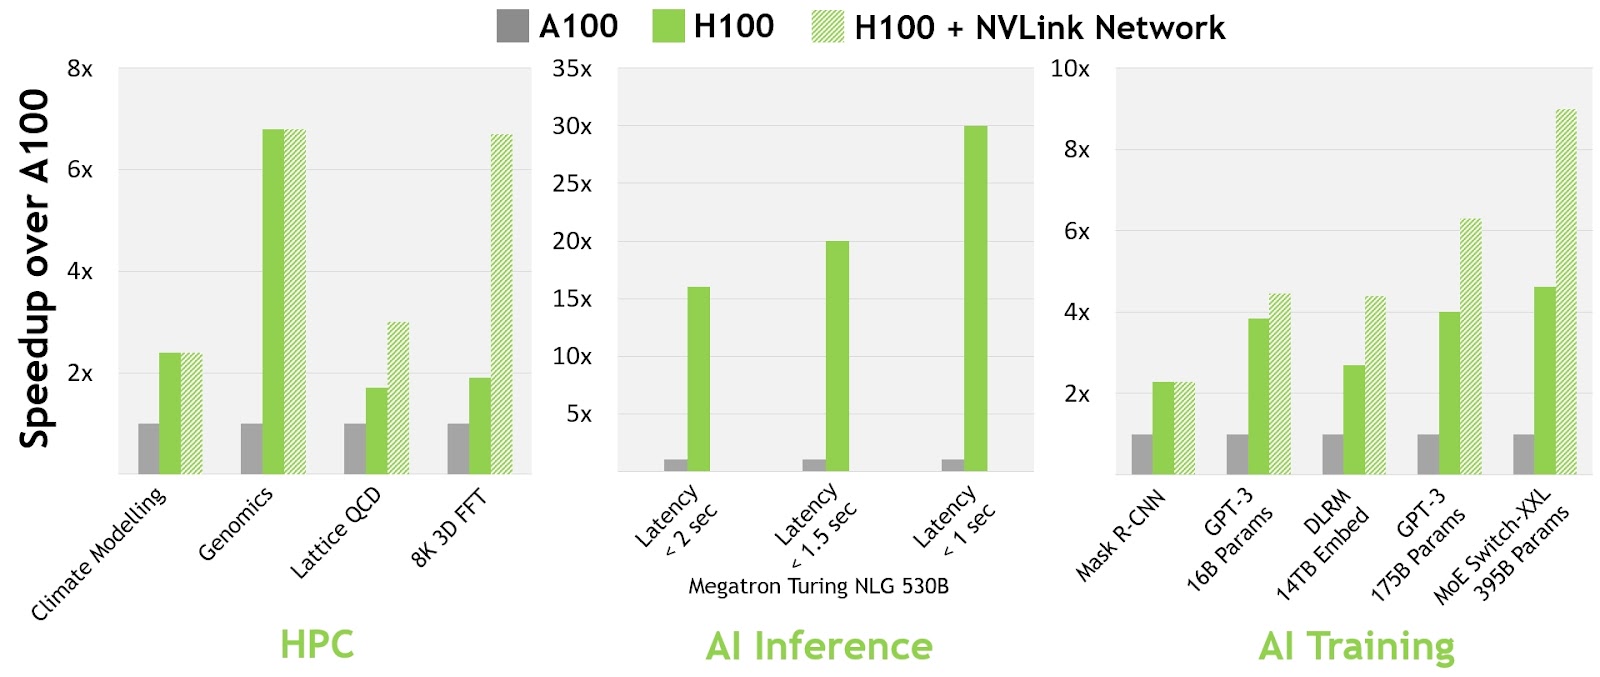 HPC, AI Inference, and AI Training diagrams all show the extra performance boost enabled by the NVLink-Network.